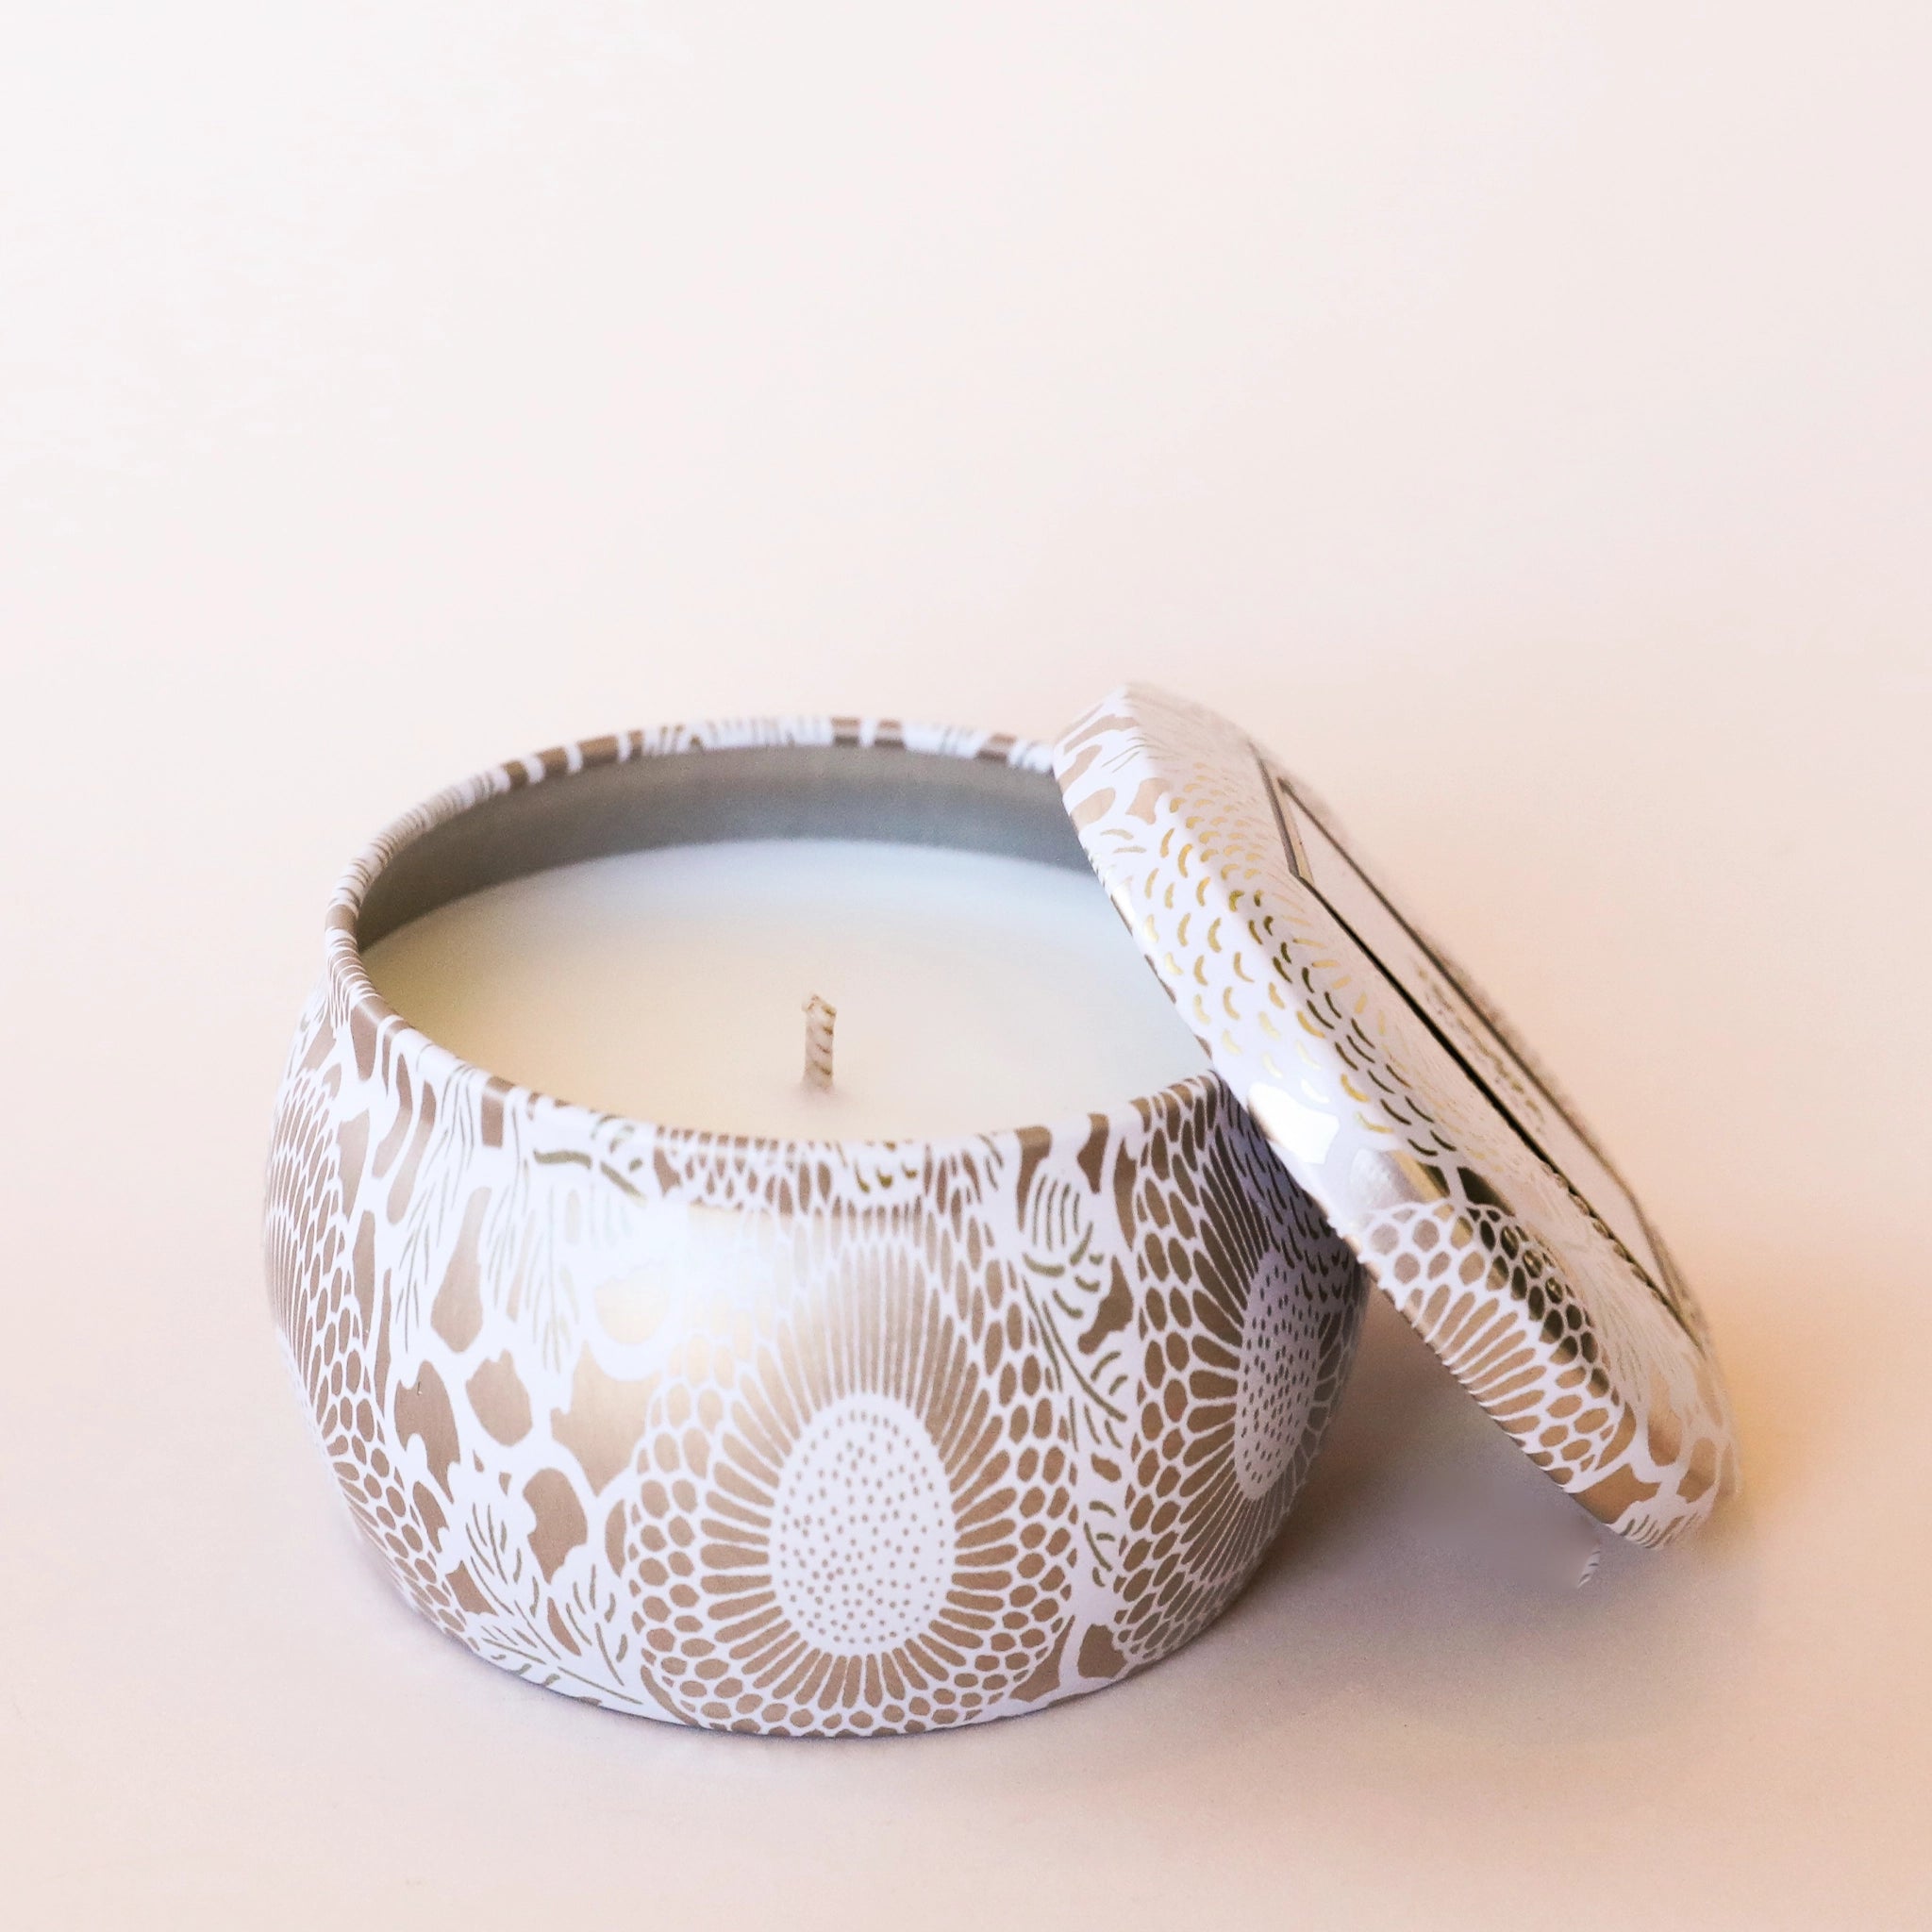 On a cream background is a decorative tin single wick candle with a lid and a label that reads, "Voluspa Mokara"